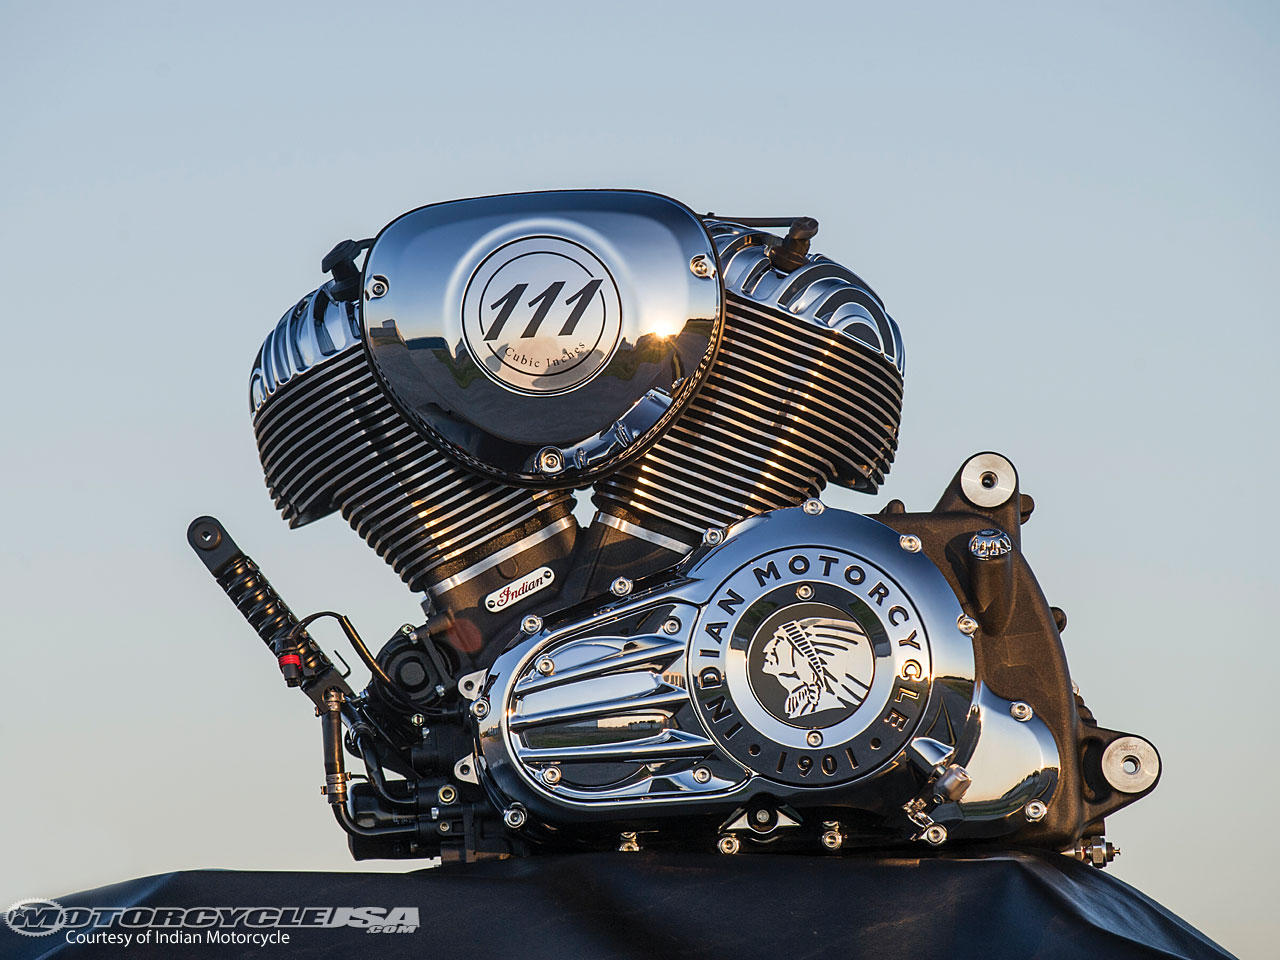 Download this New Indian Motorcycle picture